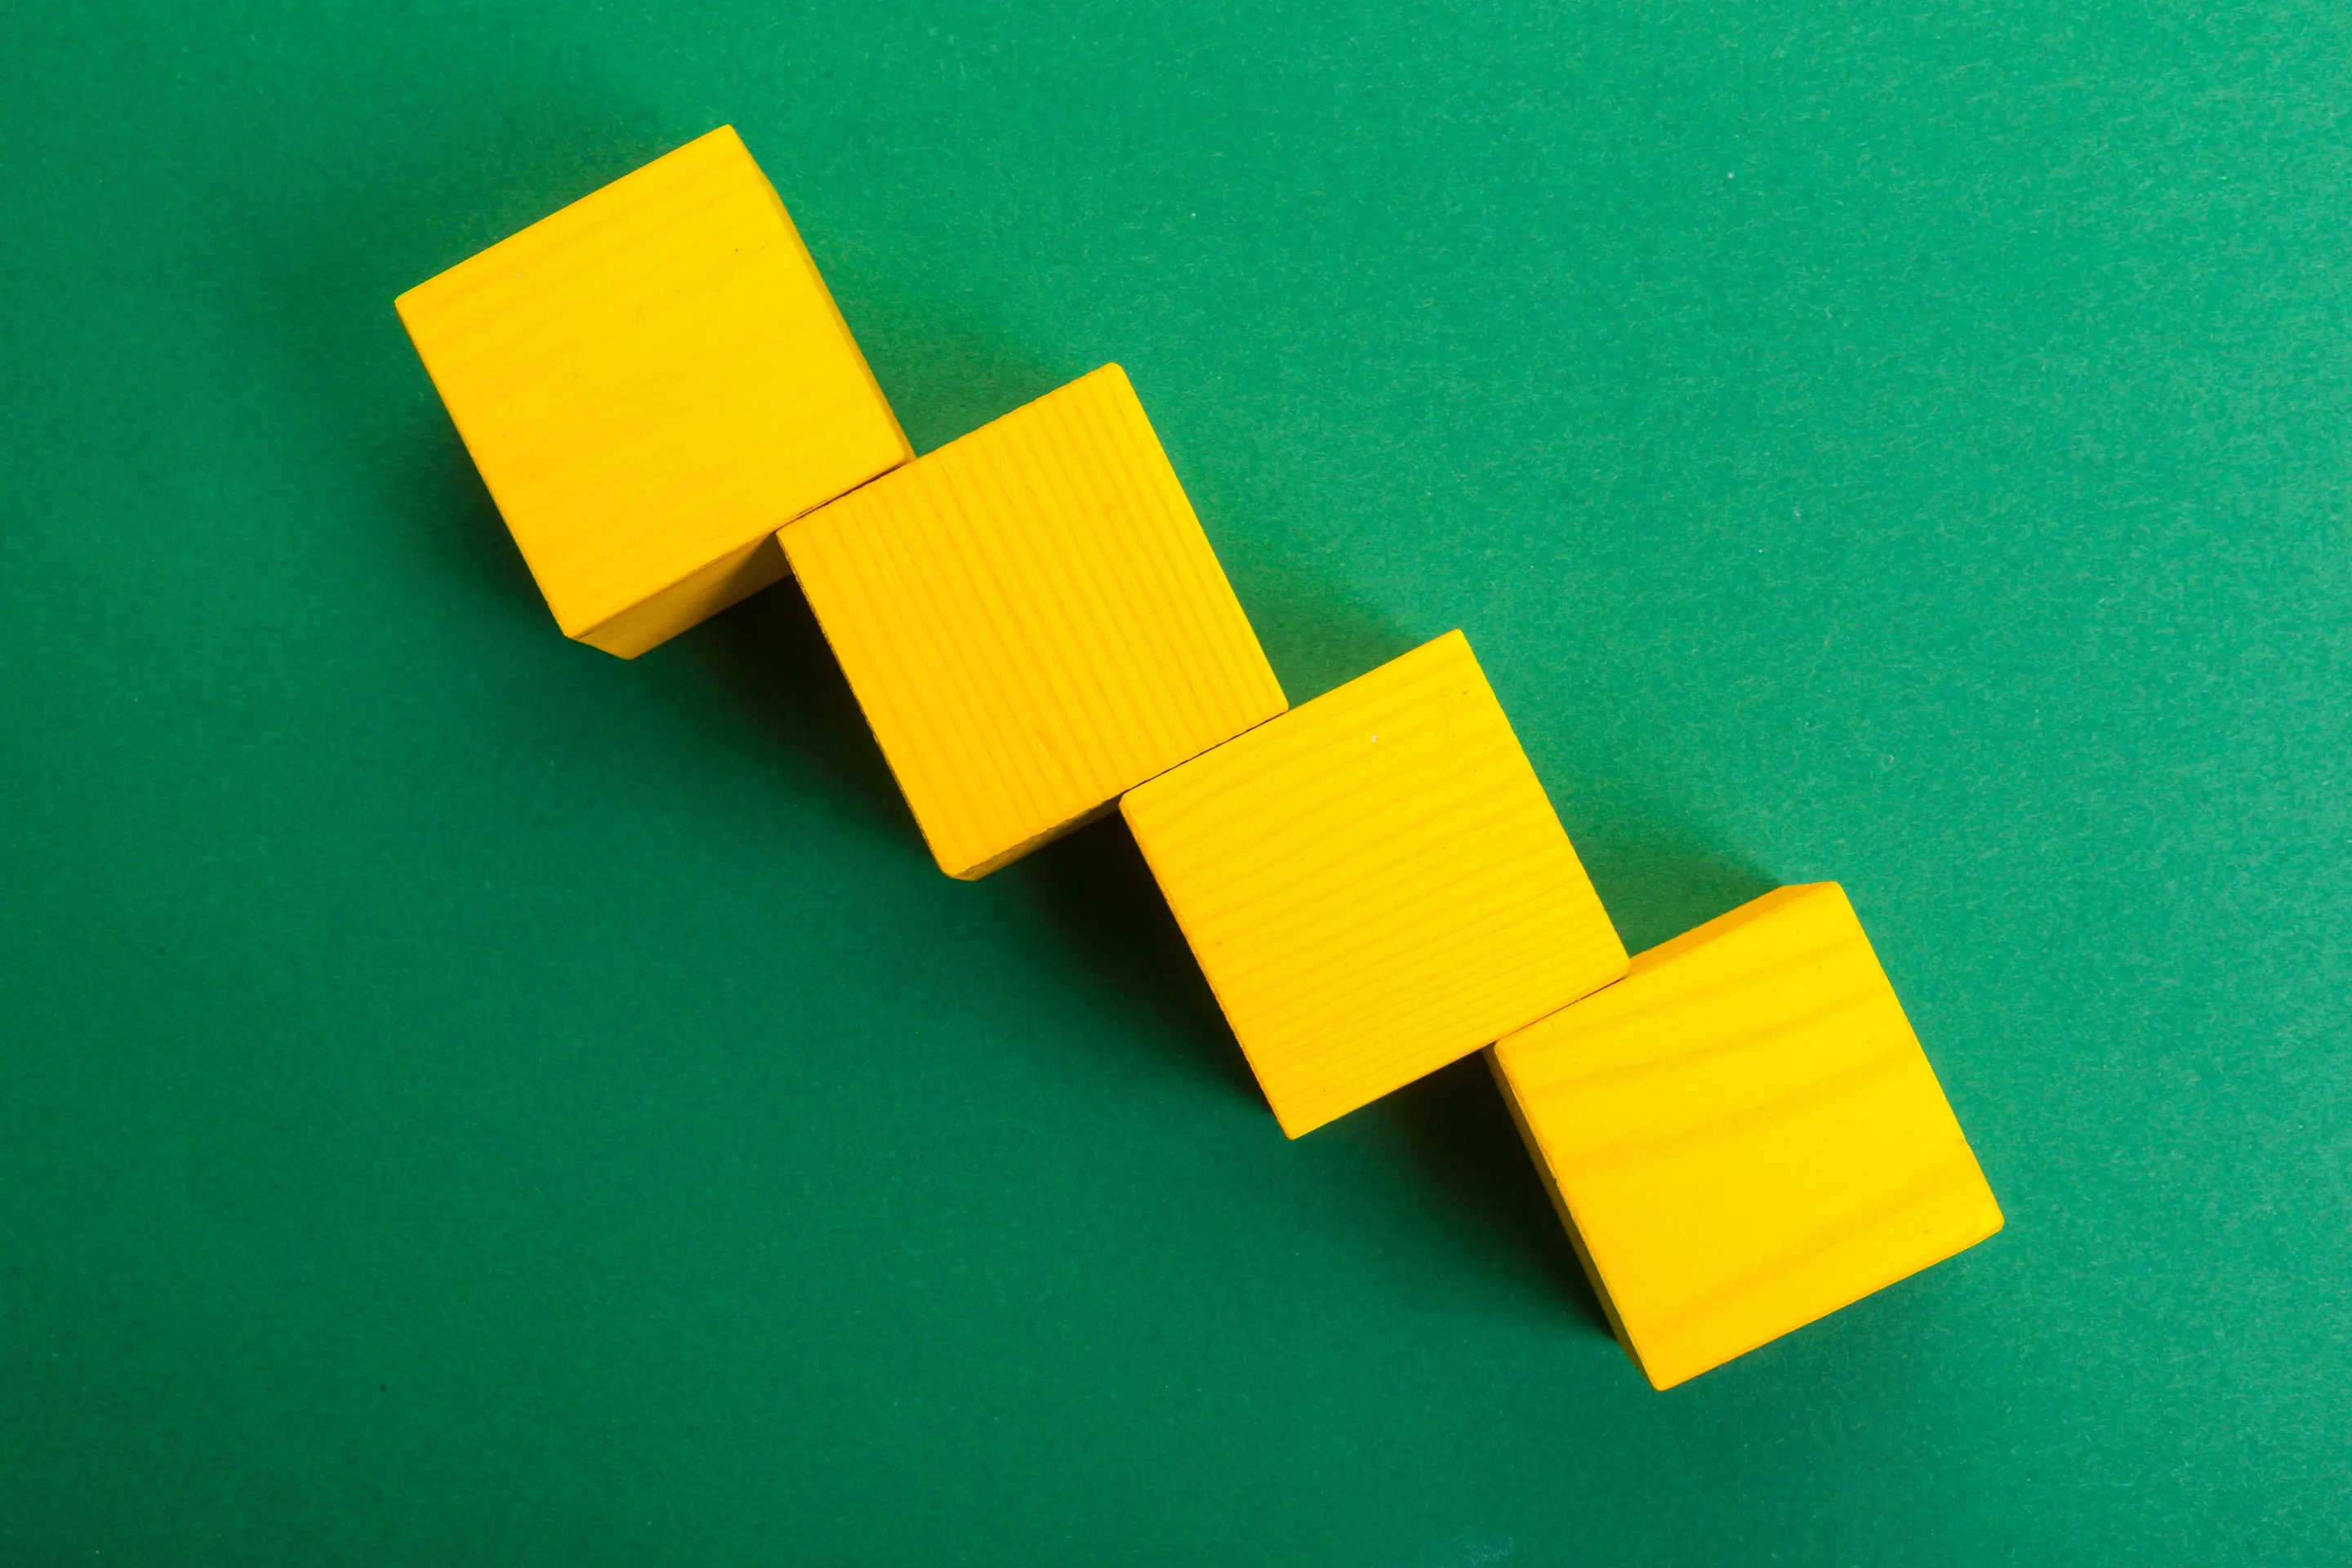 Four yellow wooden blocks stacked diagonally on a green background